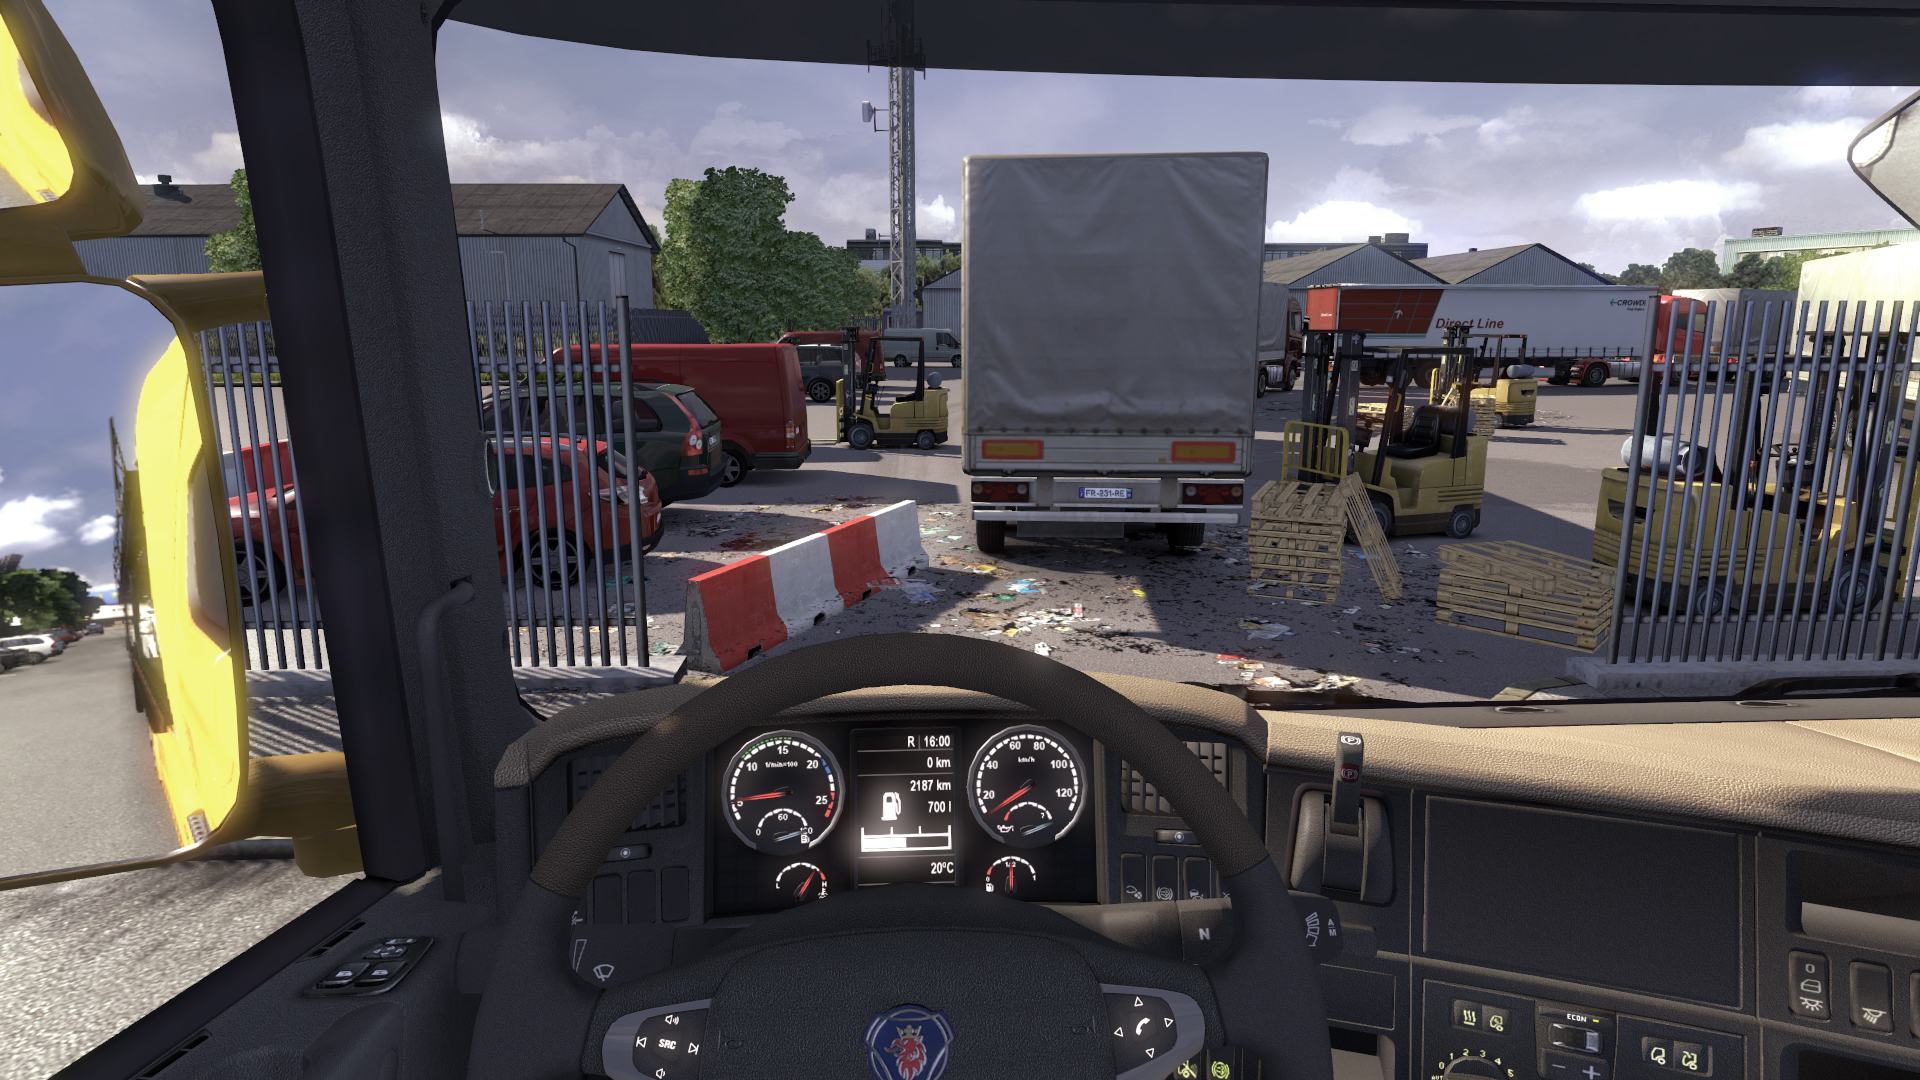 download free scania truck driving